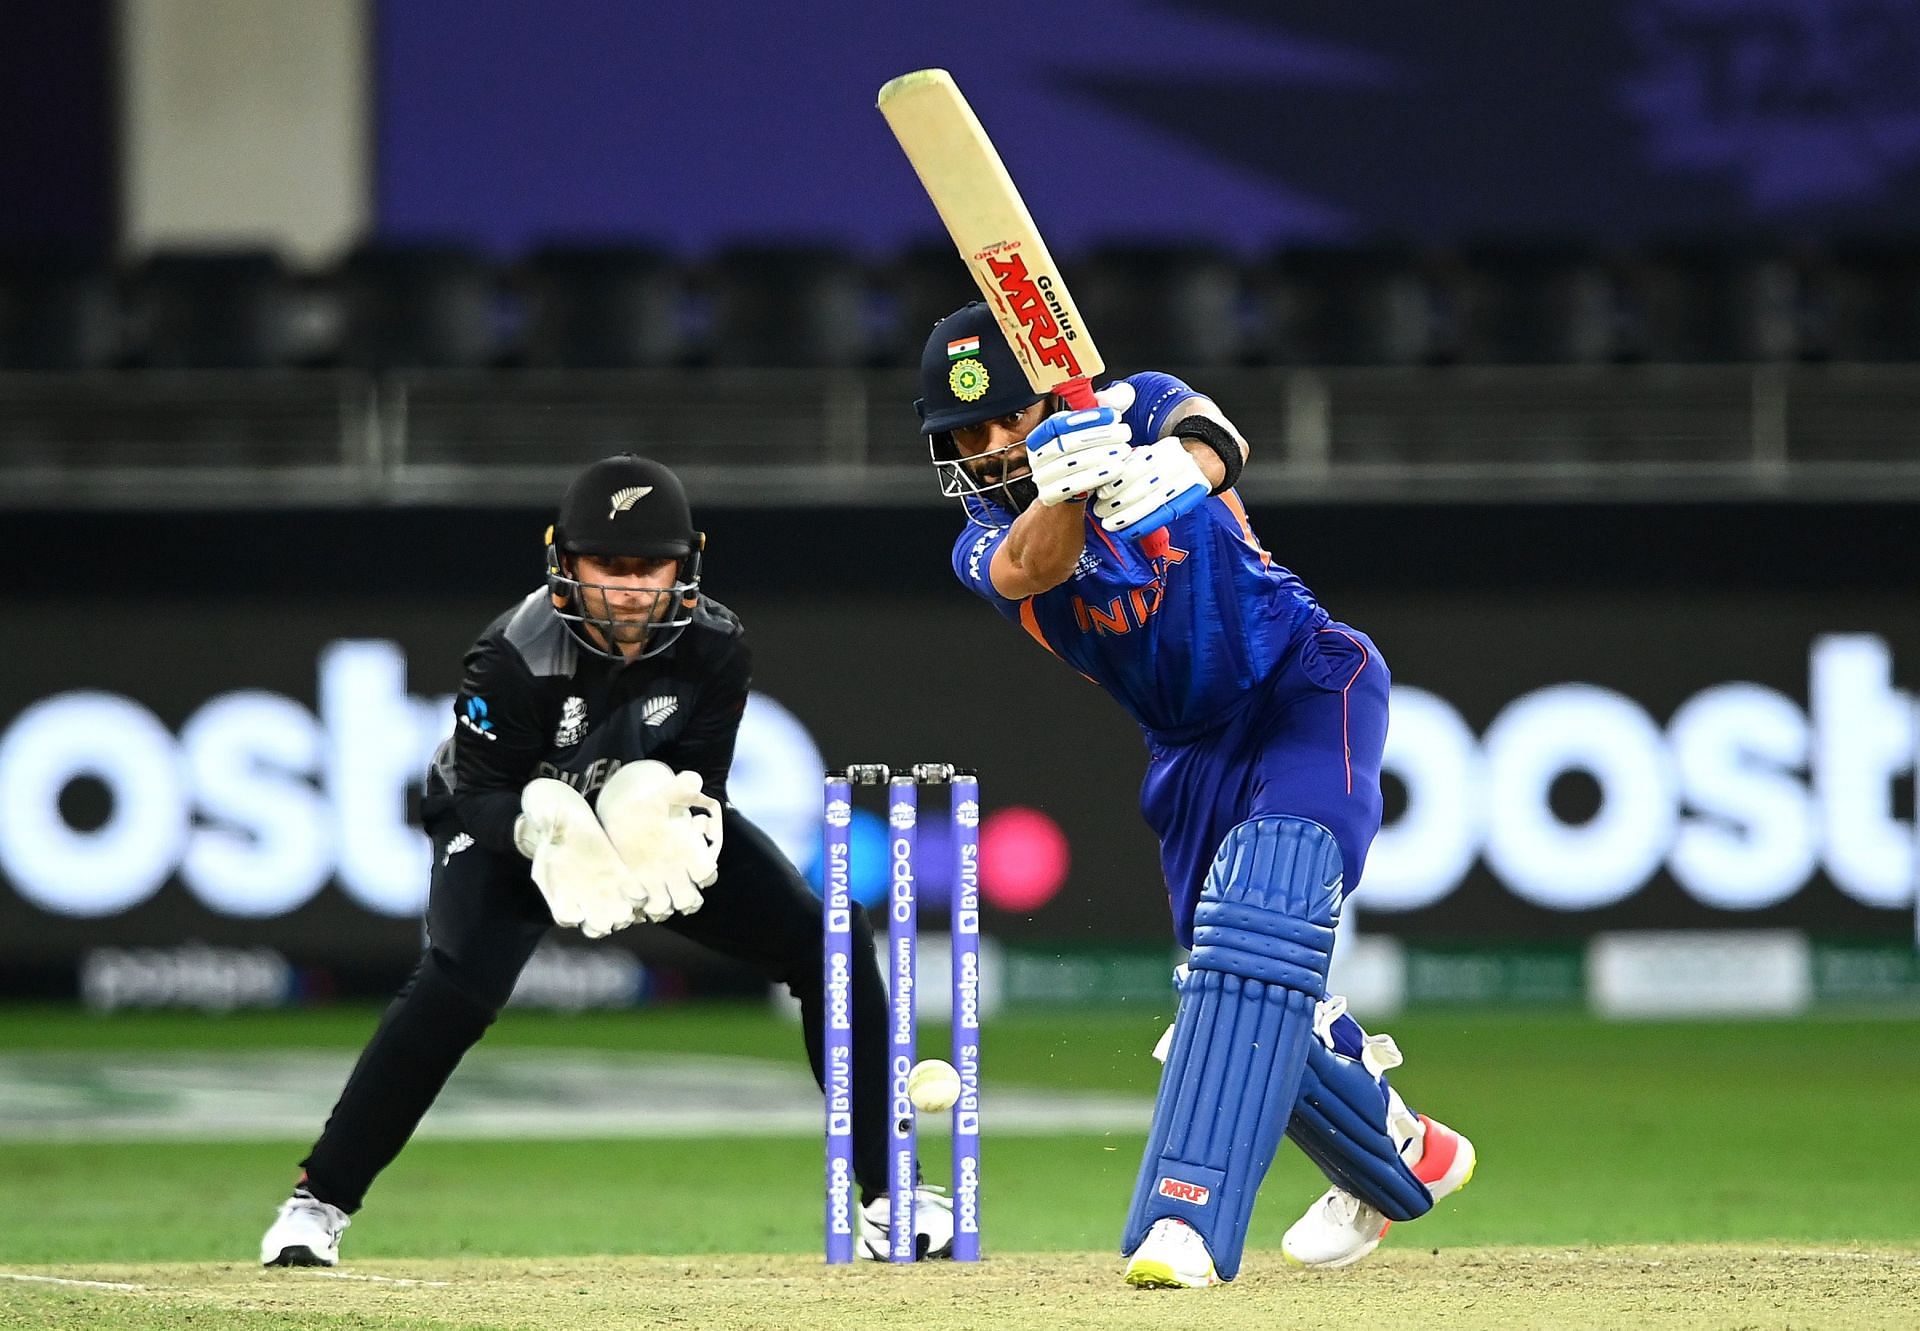 VVS Laxman wants the India team to be more positive against Afghanistan